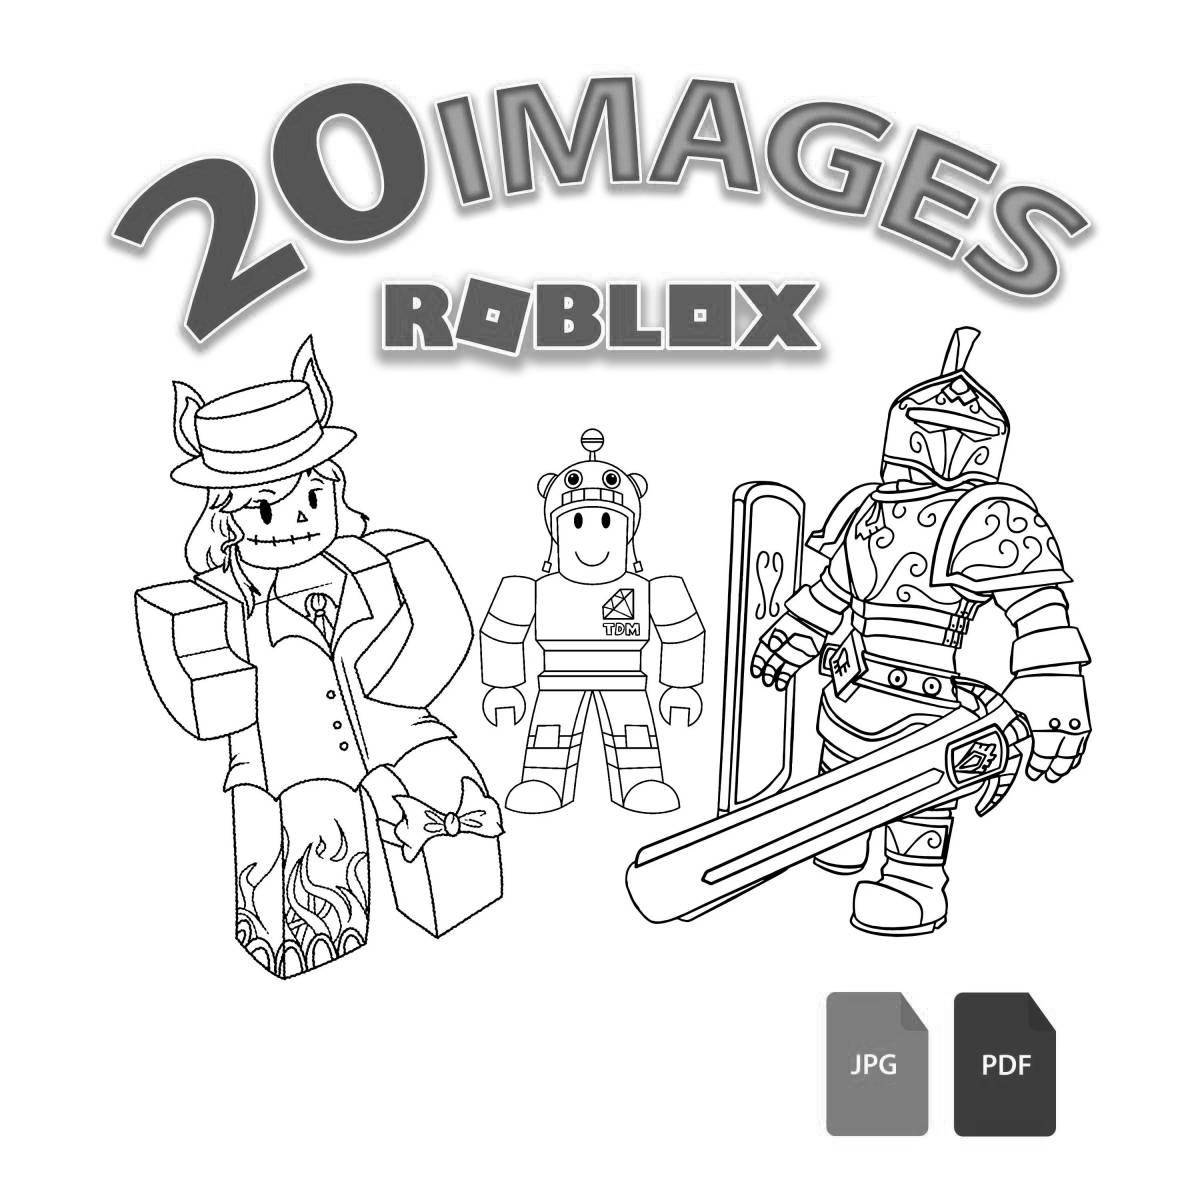 Roblox marder mystery 2 coloring book